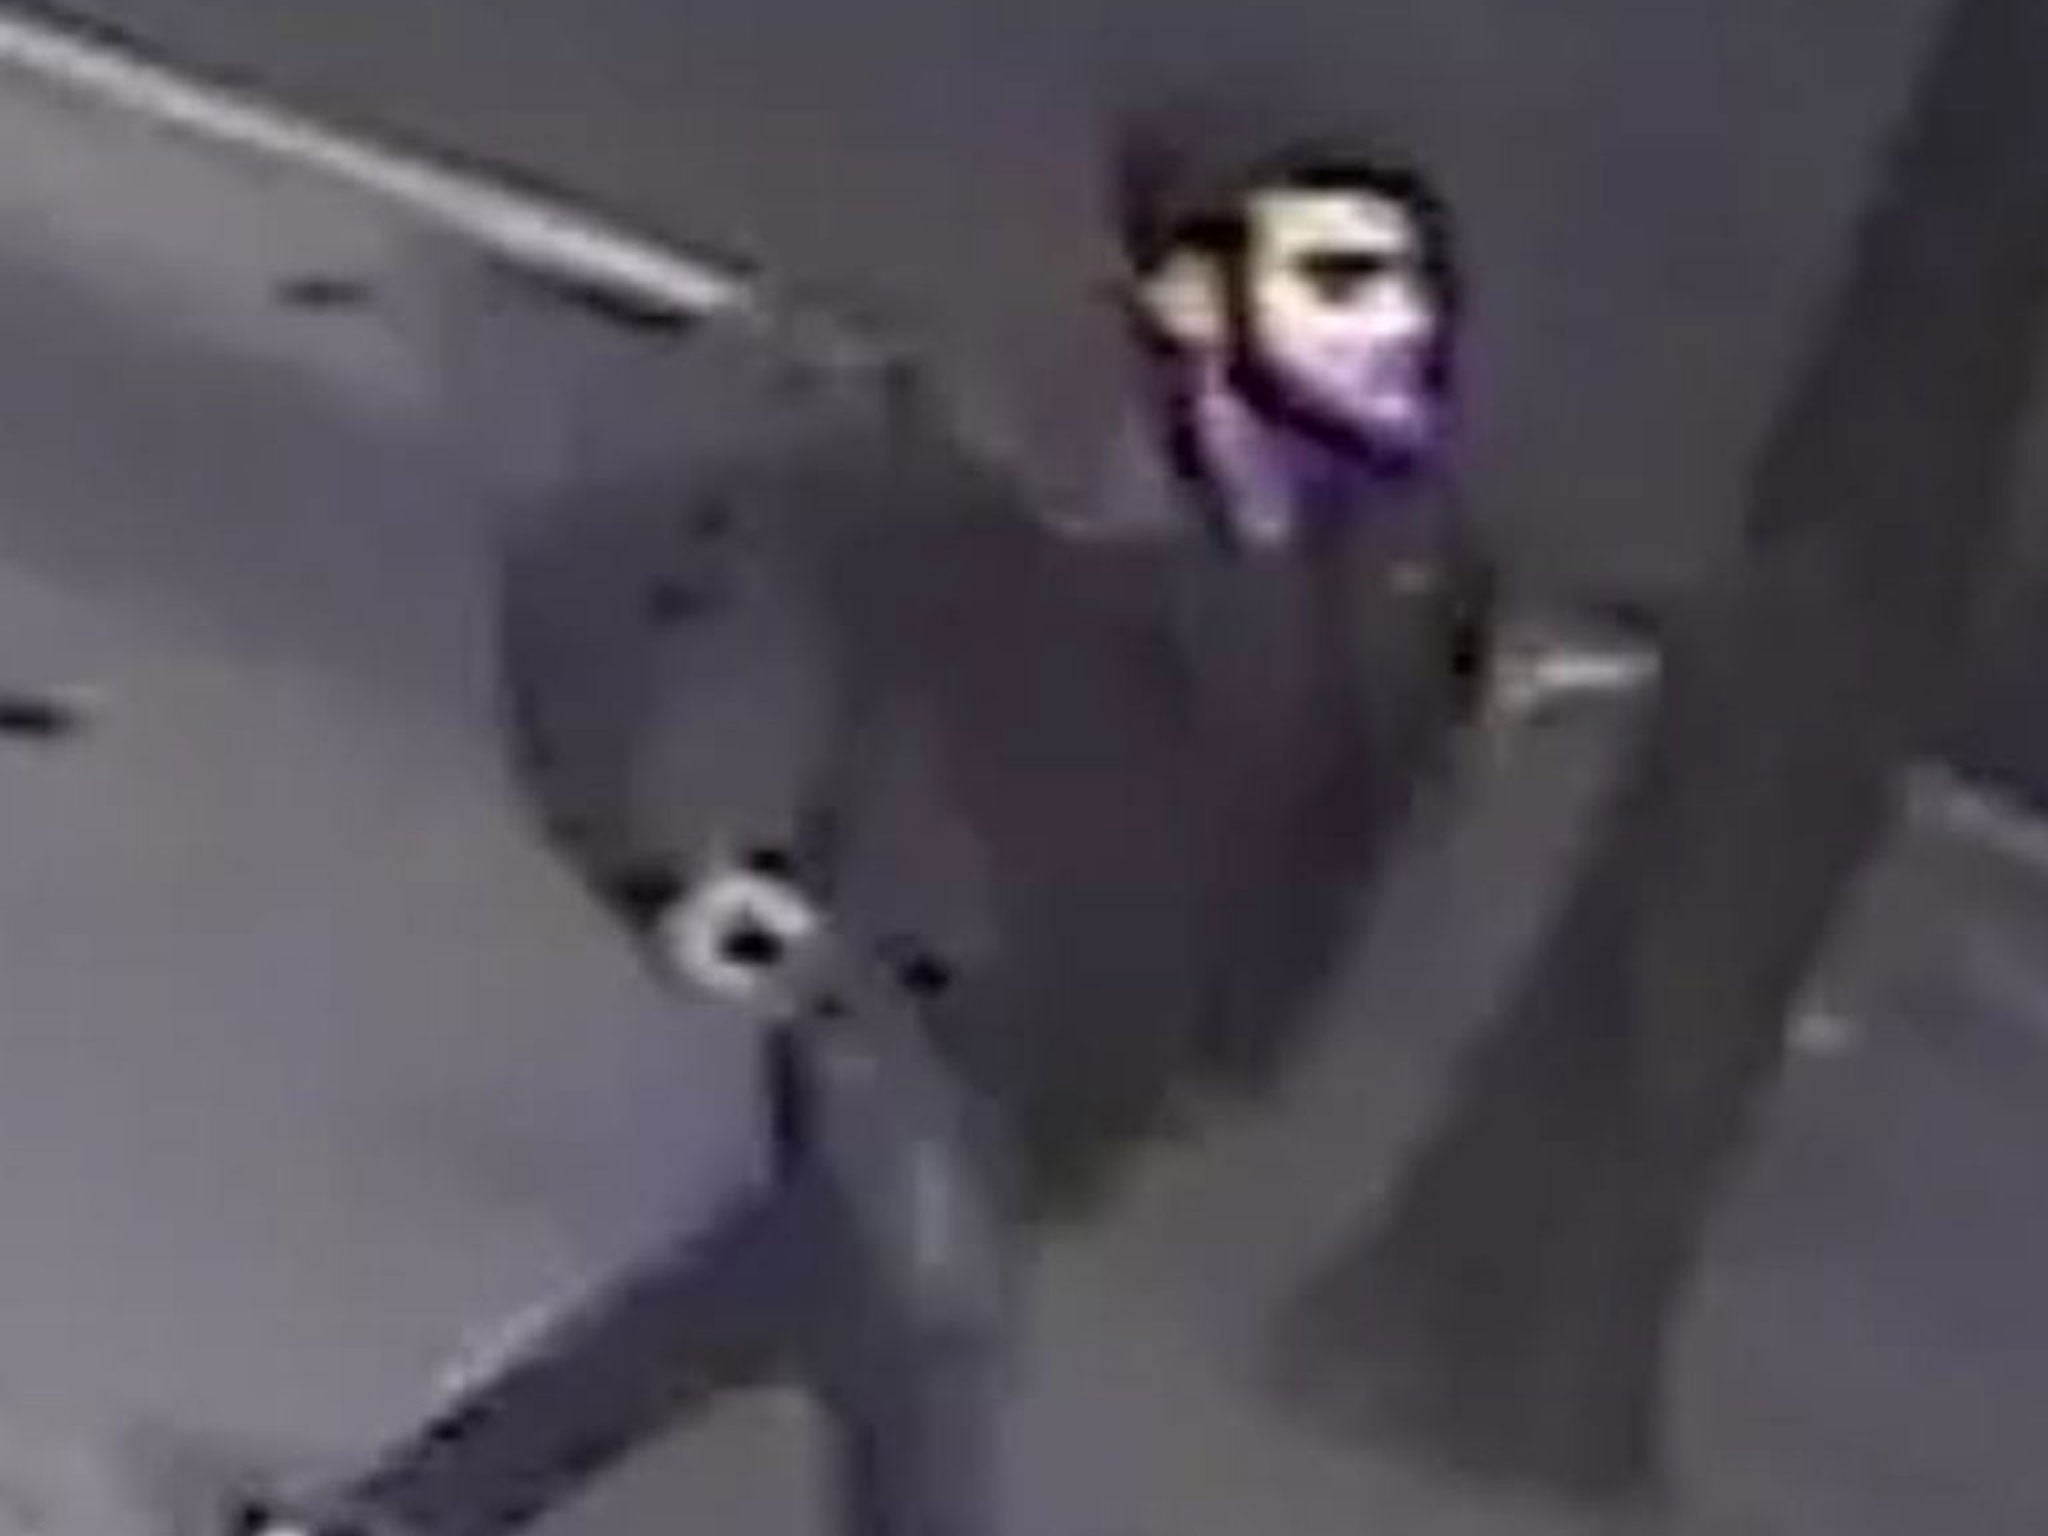 Officers from the Child Abuse and Sexual Offences Command released this CCTV image of a man sought in connection with the attack